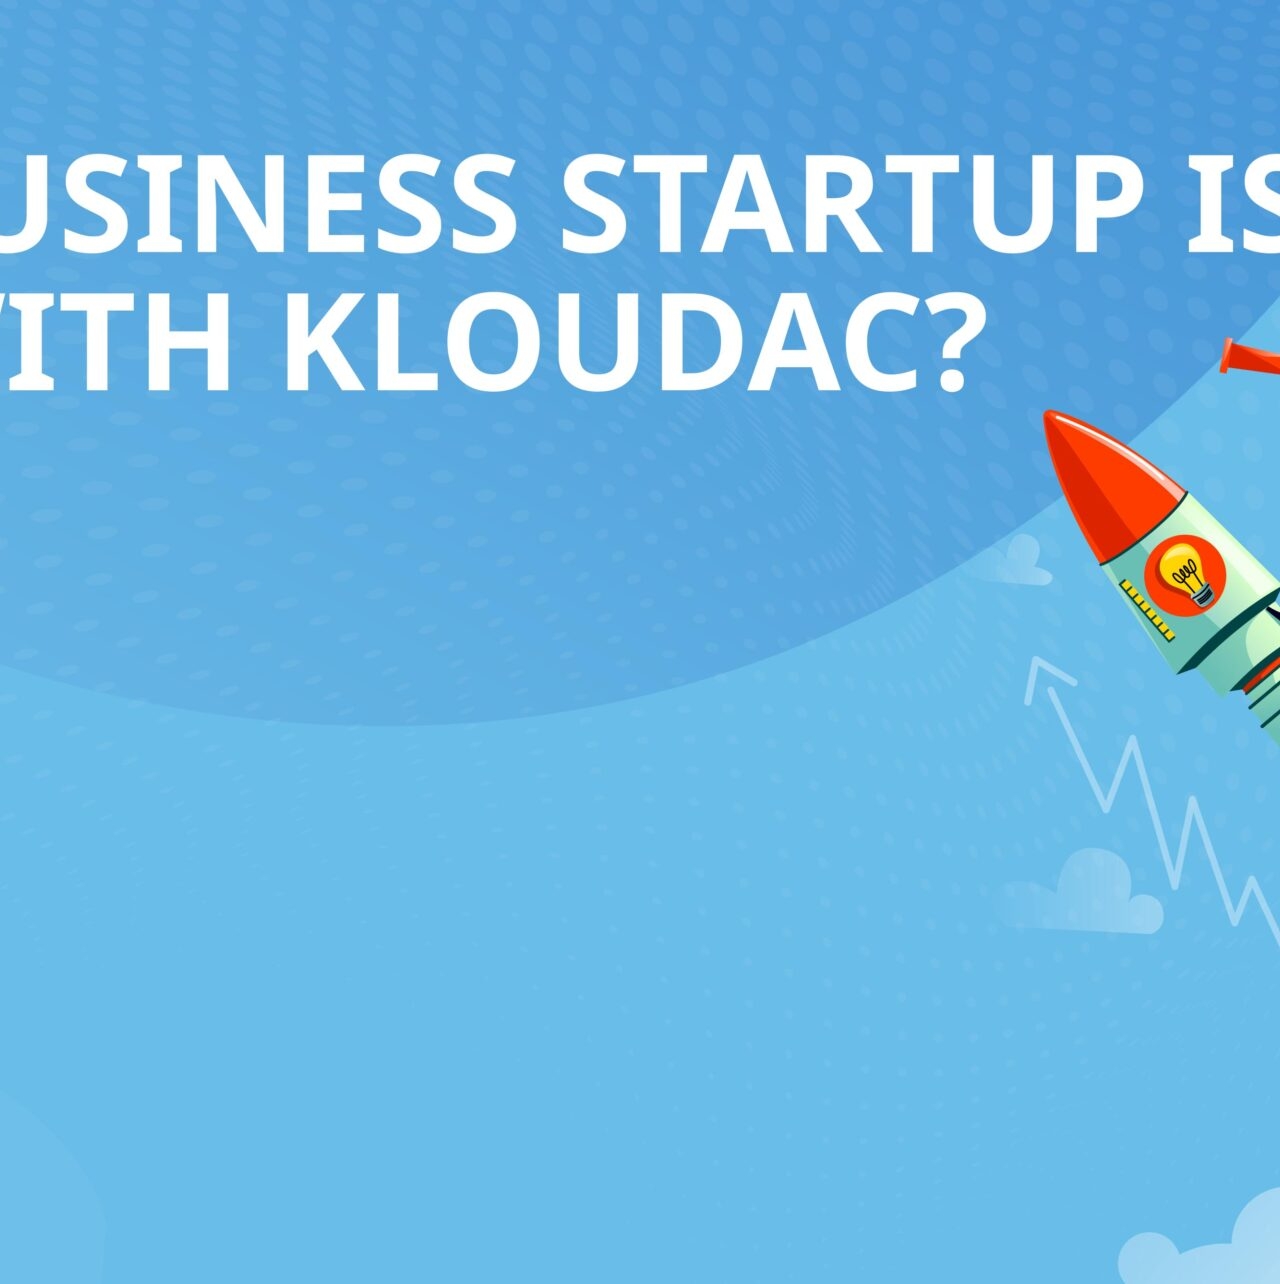 Why Business Startup is so easy with KLOUDAC?